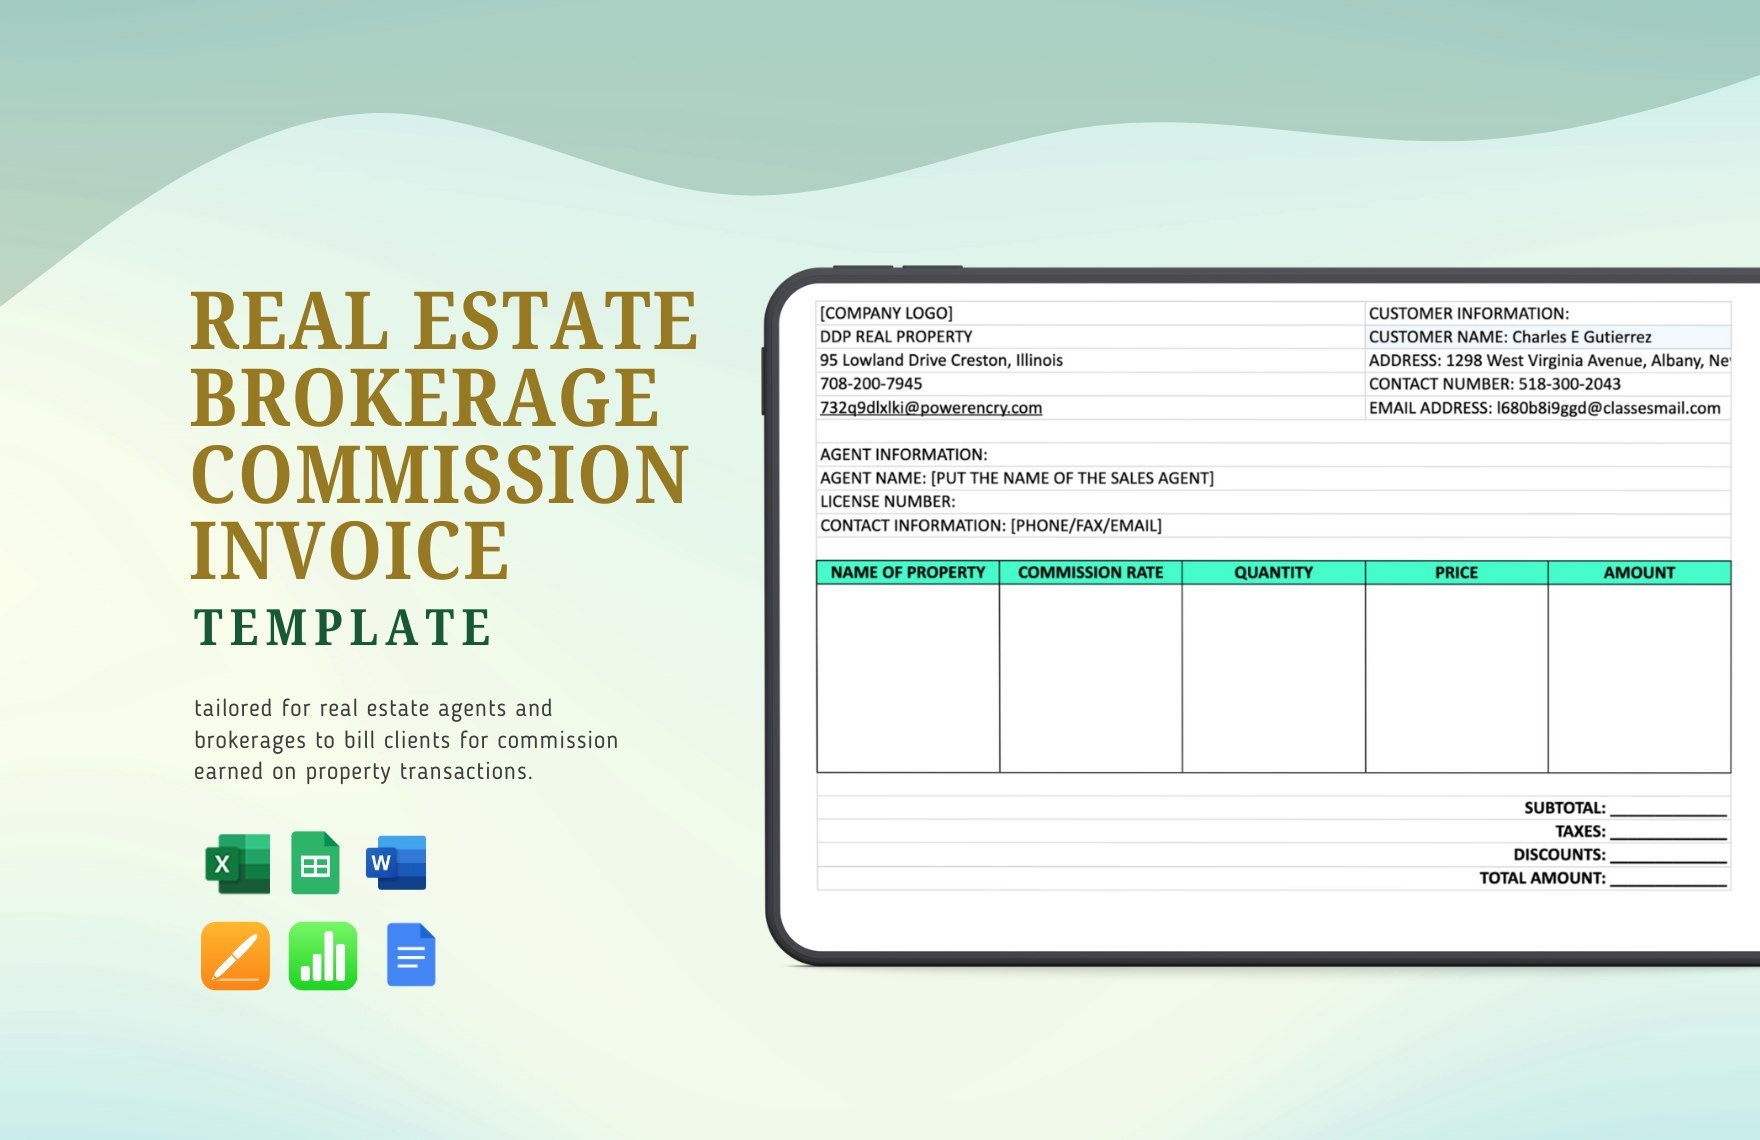 Real Estate Brokerage Commission Invoice Template in Word, Google Docs, Excel, Google Sheets, Apple Pages, Apple Numbers